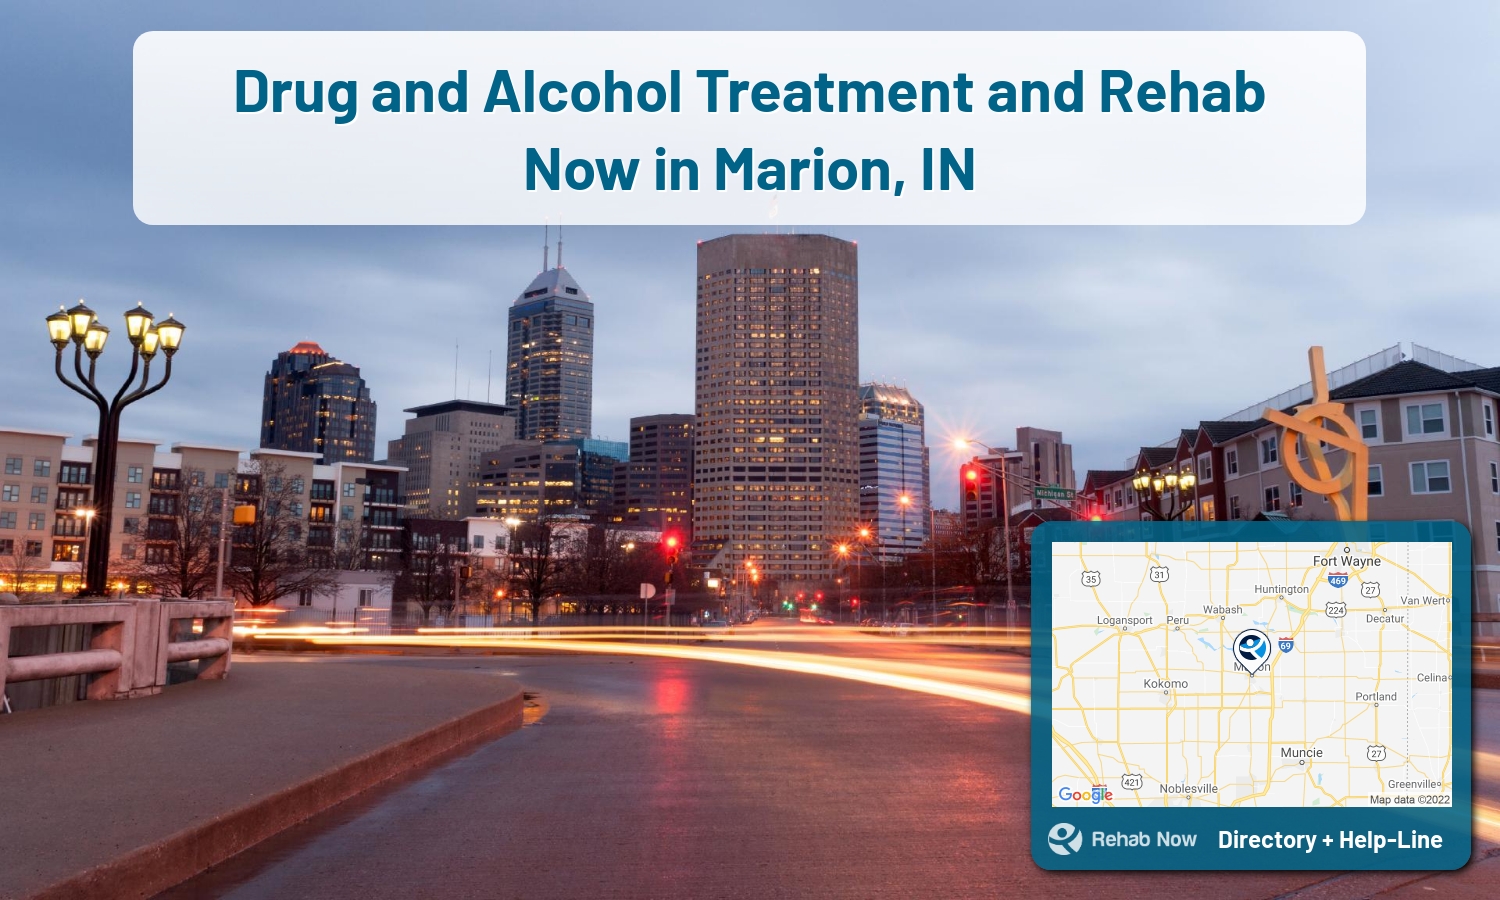 Ready to pick a rehab center in Marion? Get off alcohol, opiates, and other drugs, by selecting top drug rehab centers in Indiana